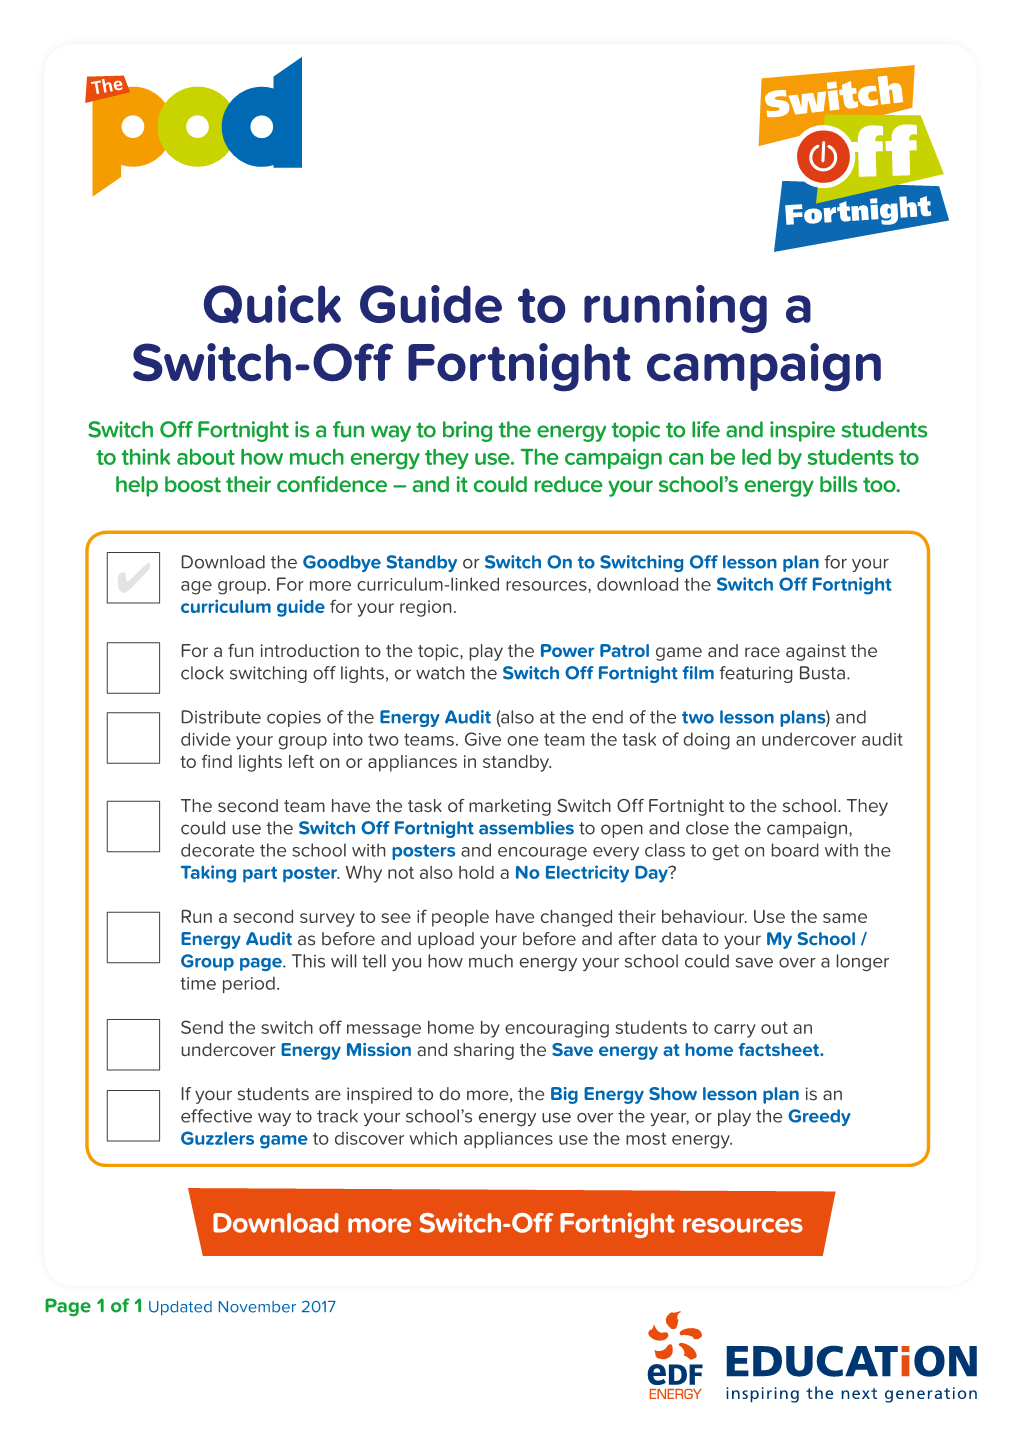 Quick Guide to Running a Switch-Off Fortnight Campaign